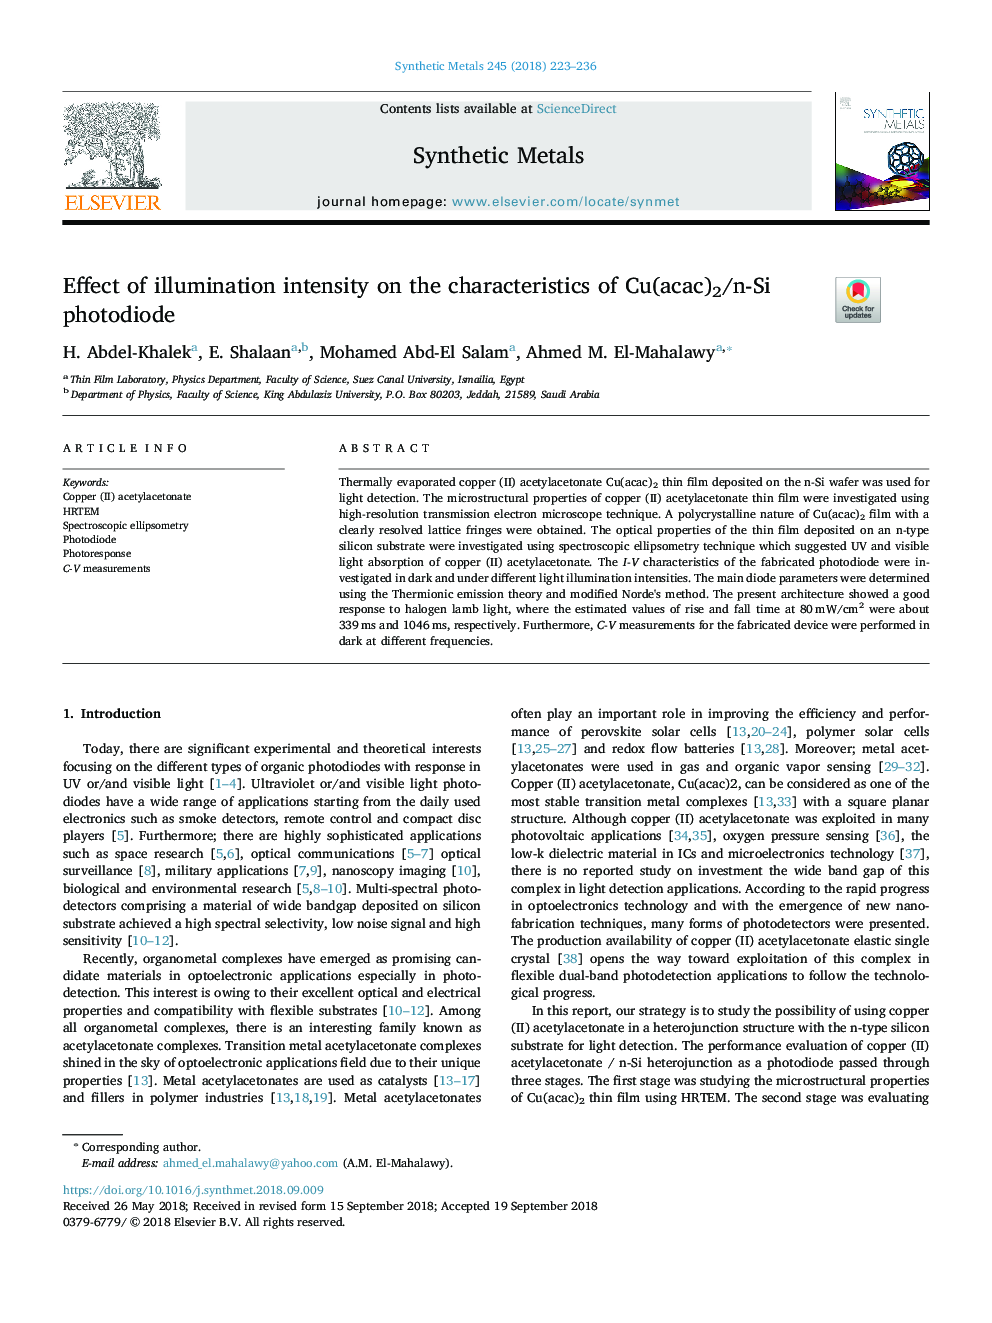 Effect of illumination intensity on the characteristics of Cu(acac)2/n-Si photodiode